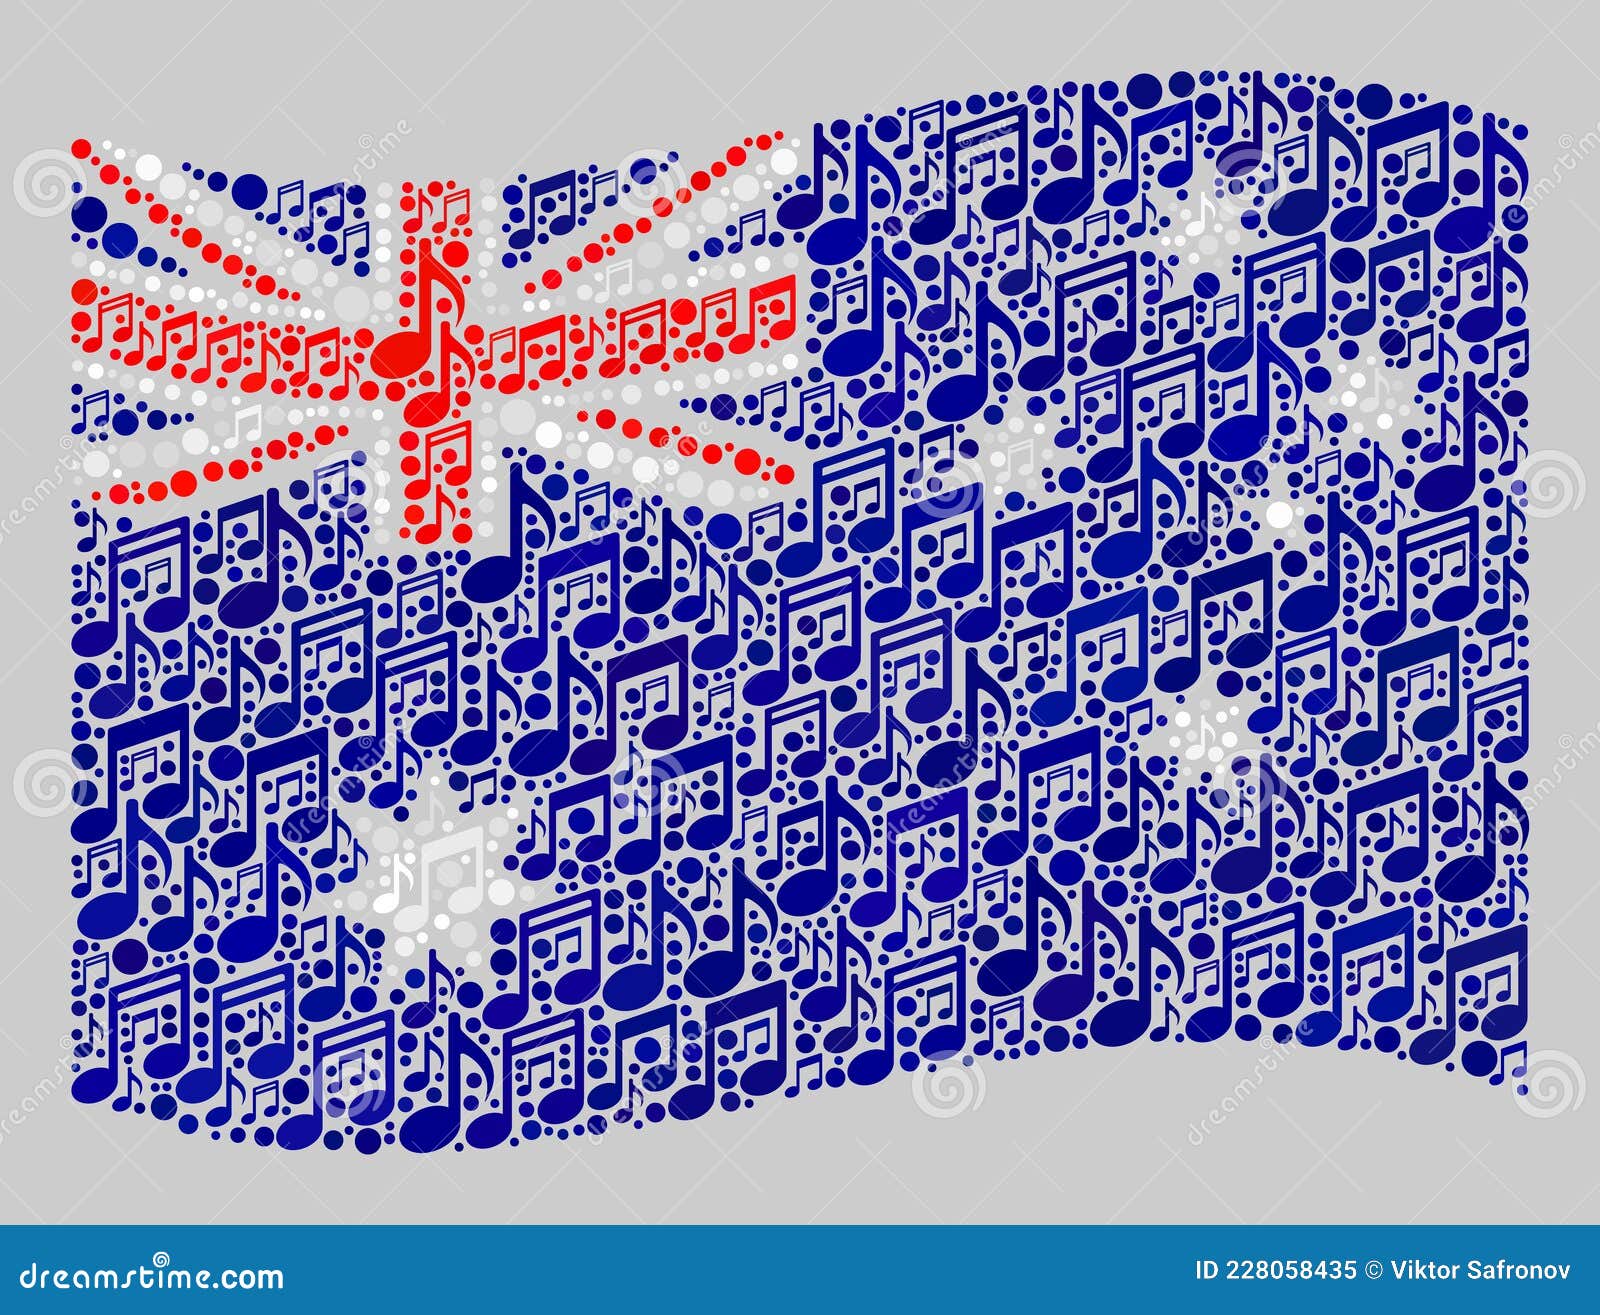 How to Draw the Australian Flag  Aussie Flag Drawing  YouTube